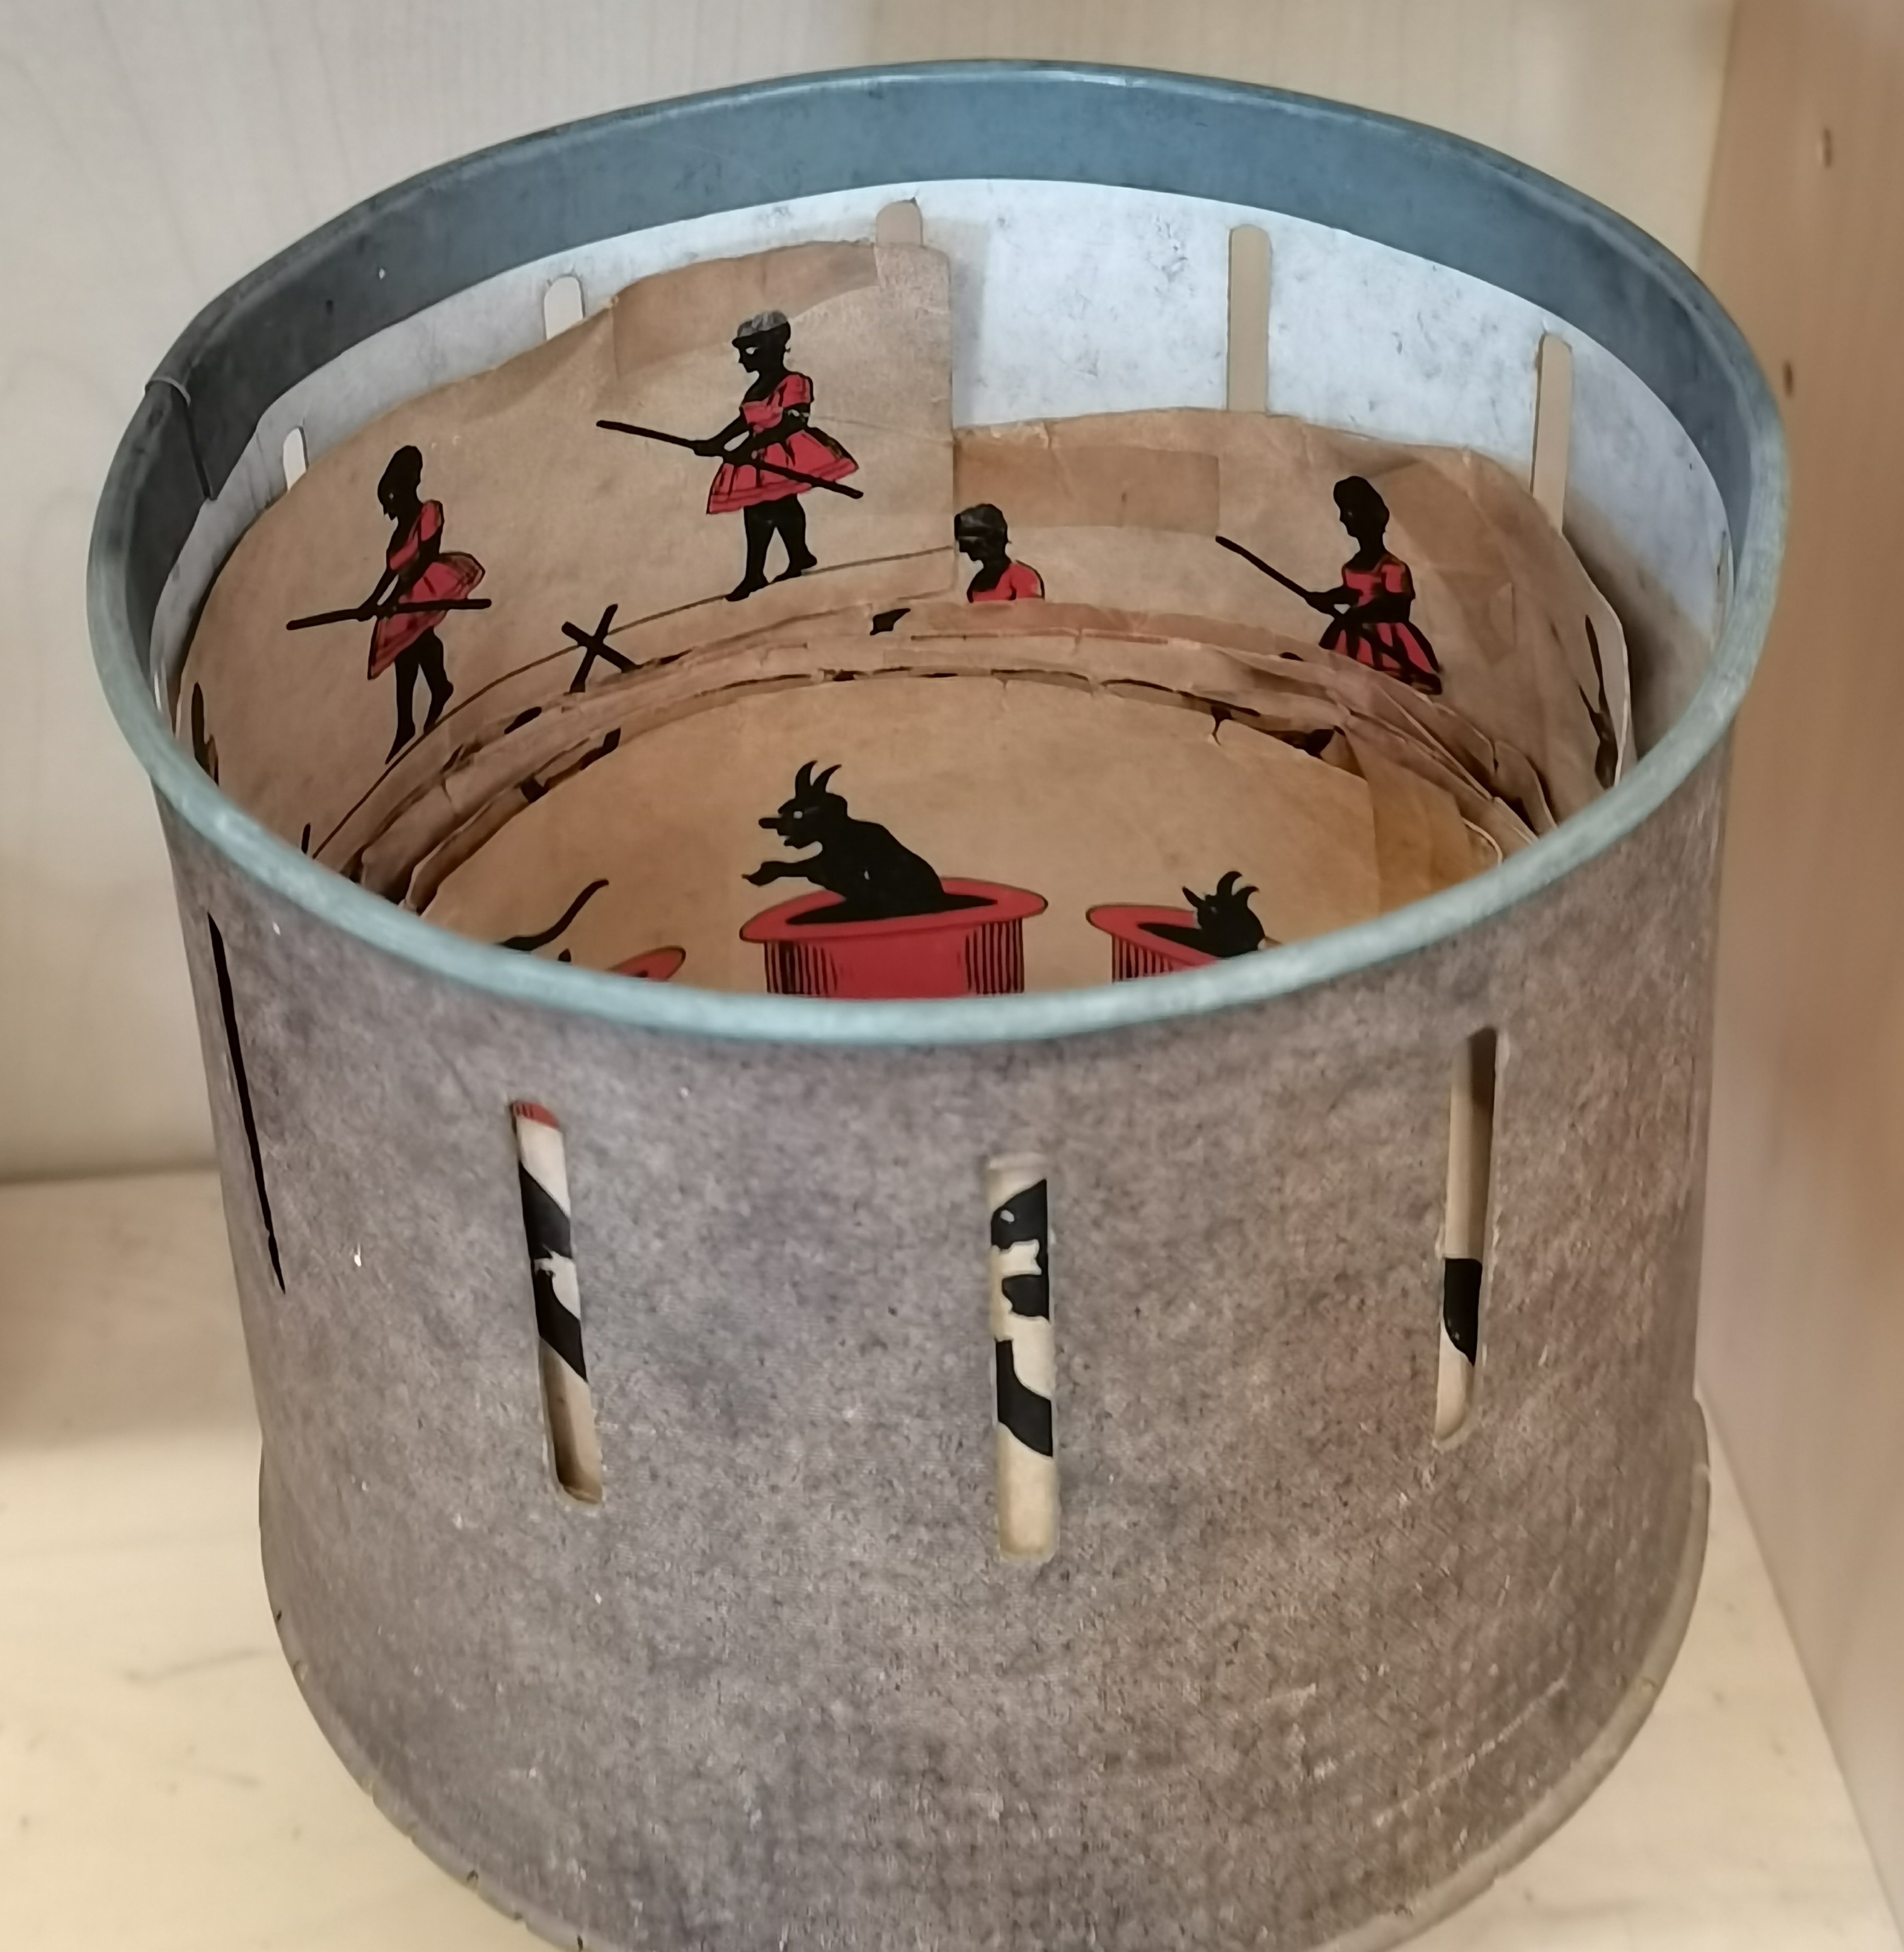 Antique Zoetrope - Image 2 of 2